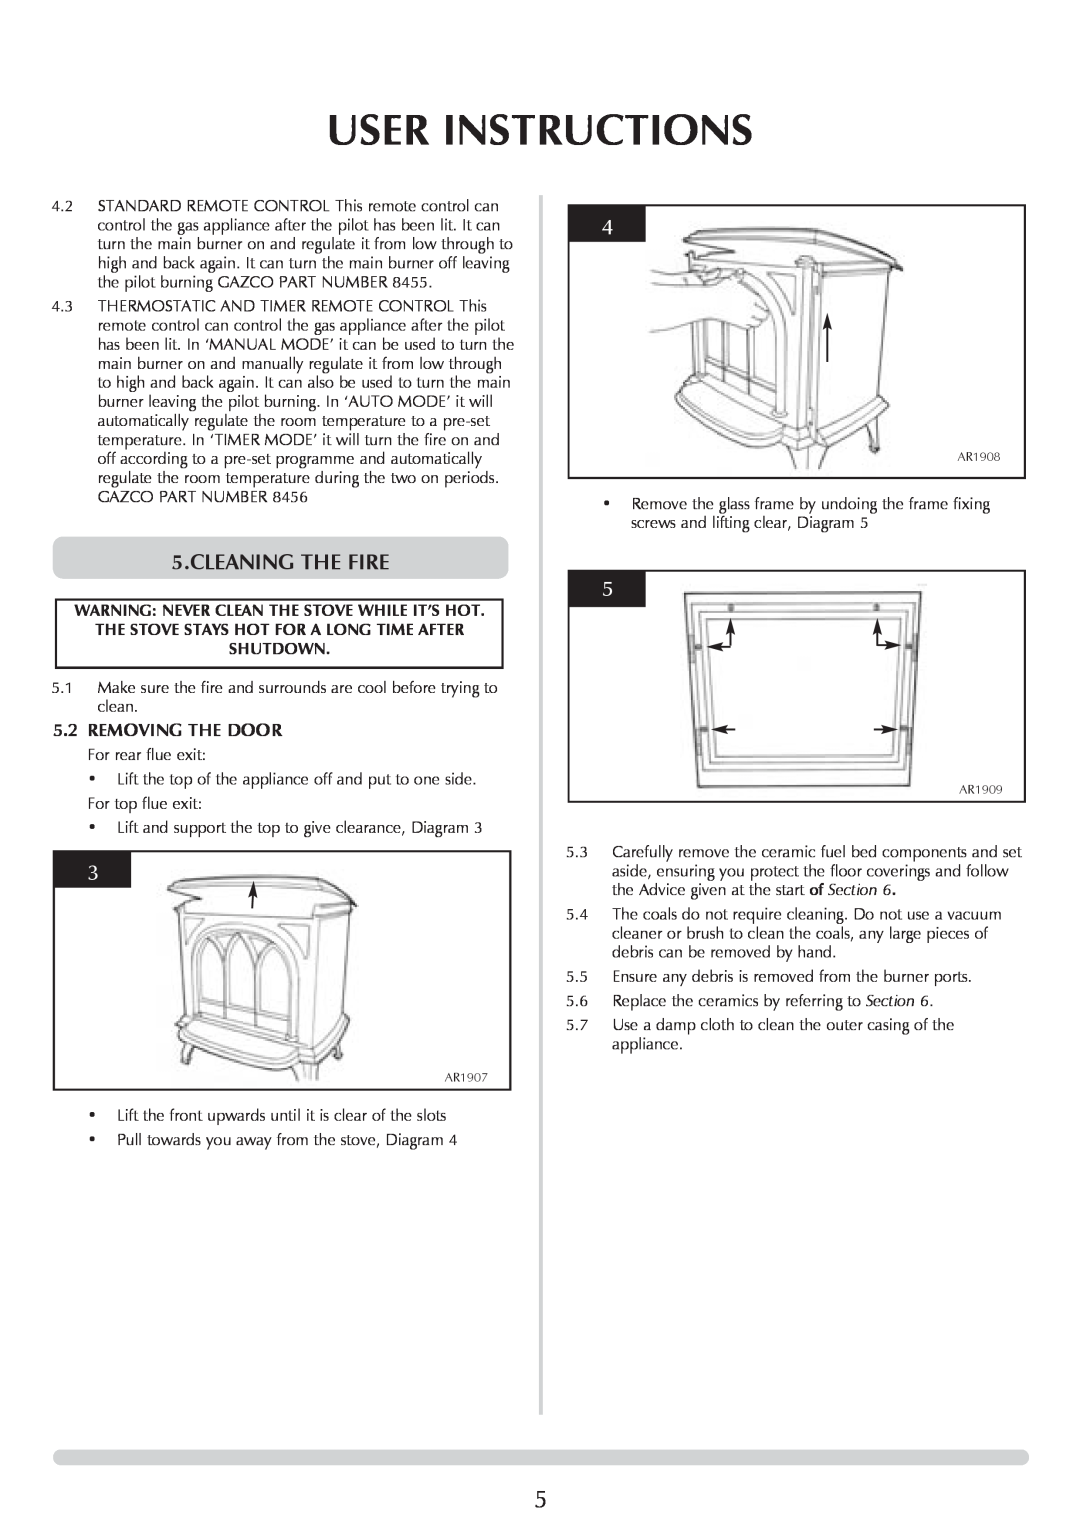 Stovax Huntingdon 30 manual User Instructions, Cleaning The Fire, 5.2REMOVING THE DOOR 